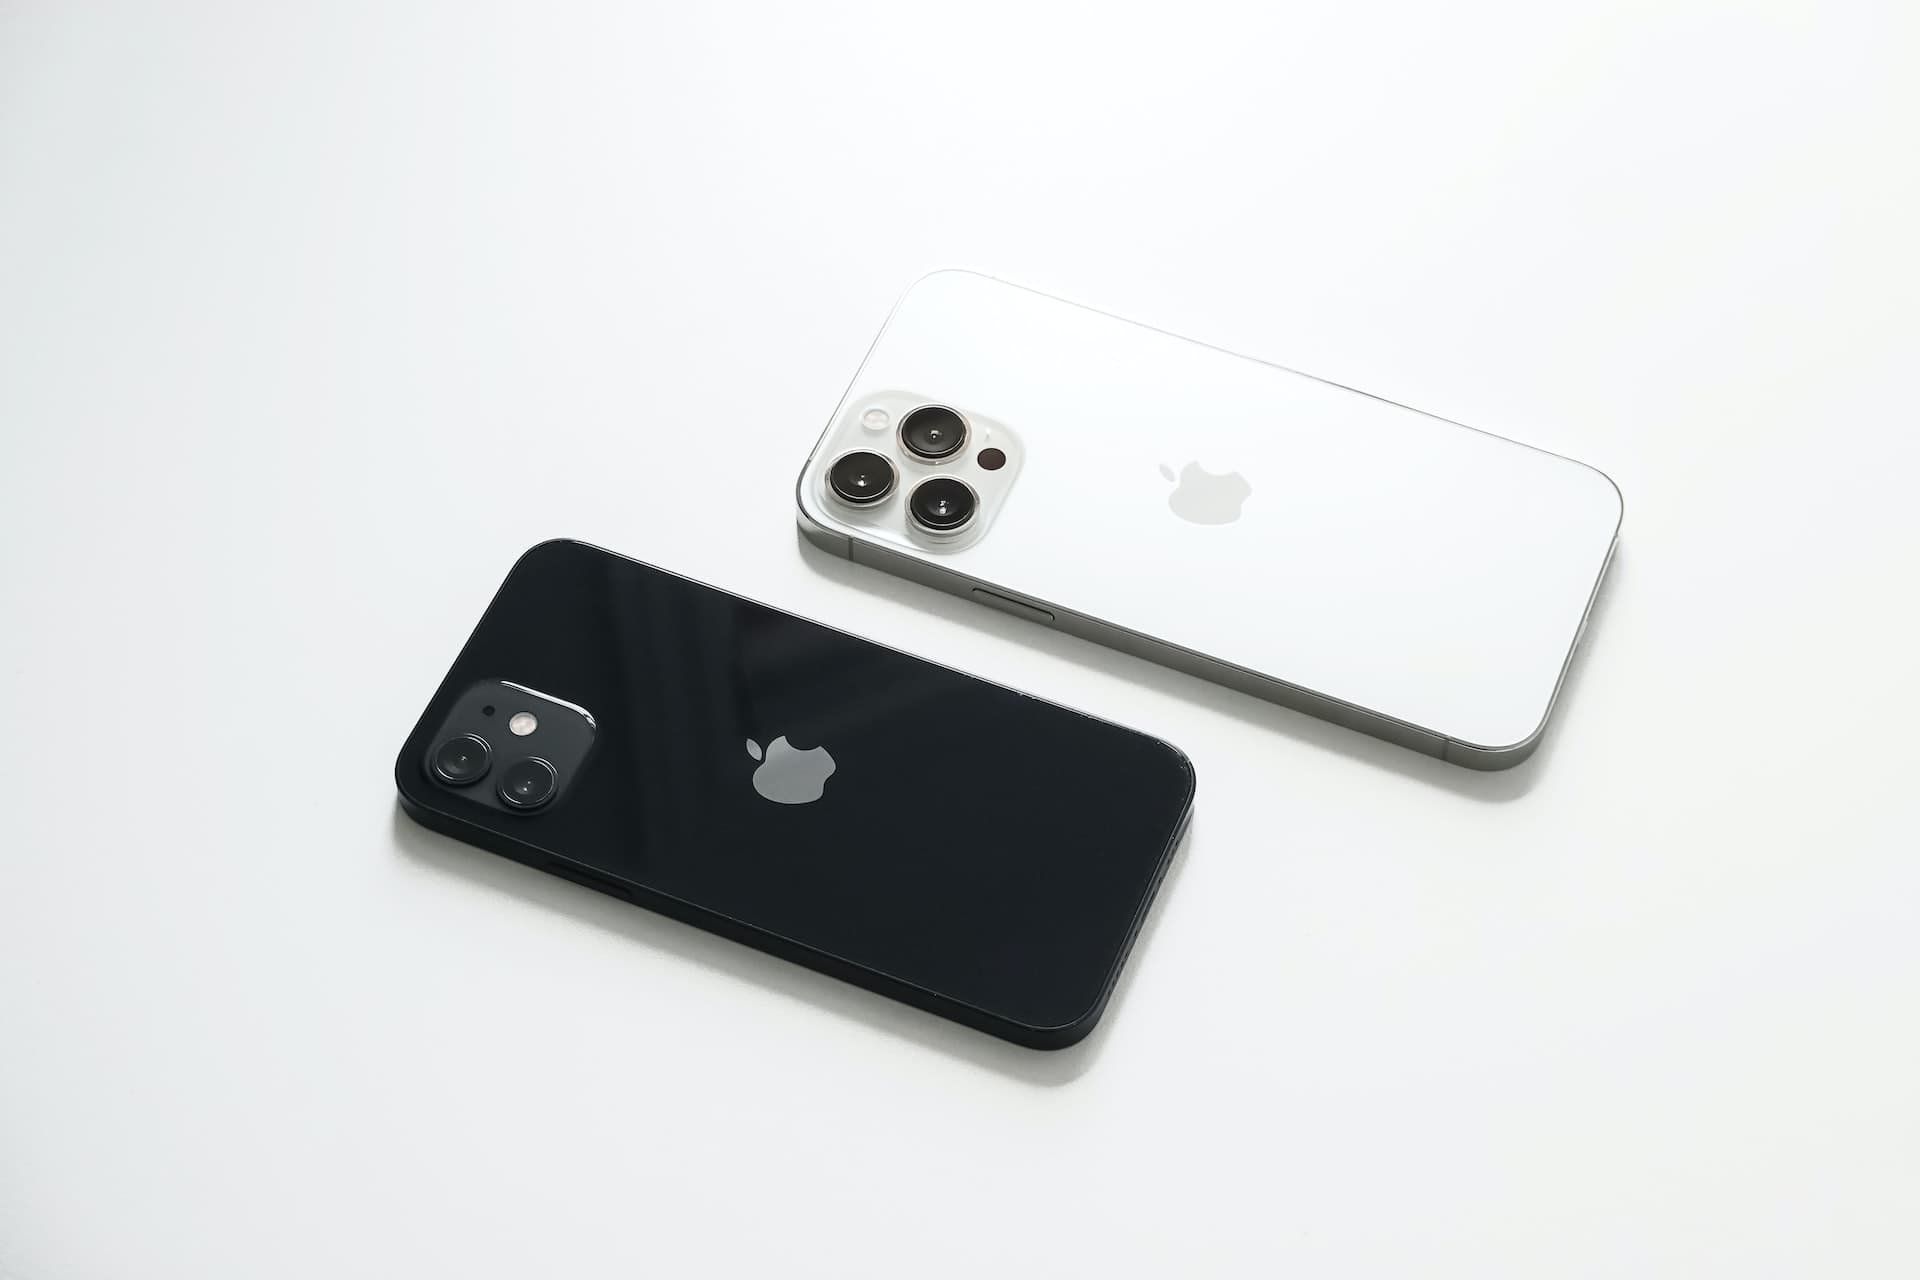 iPhone 12 in black color with two rear cameras and white iPhone 13 Pro with three back cameras kept together